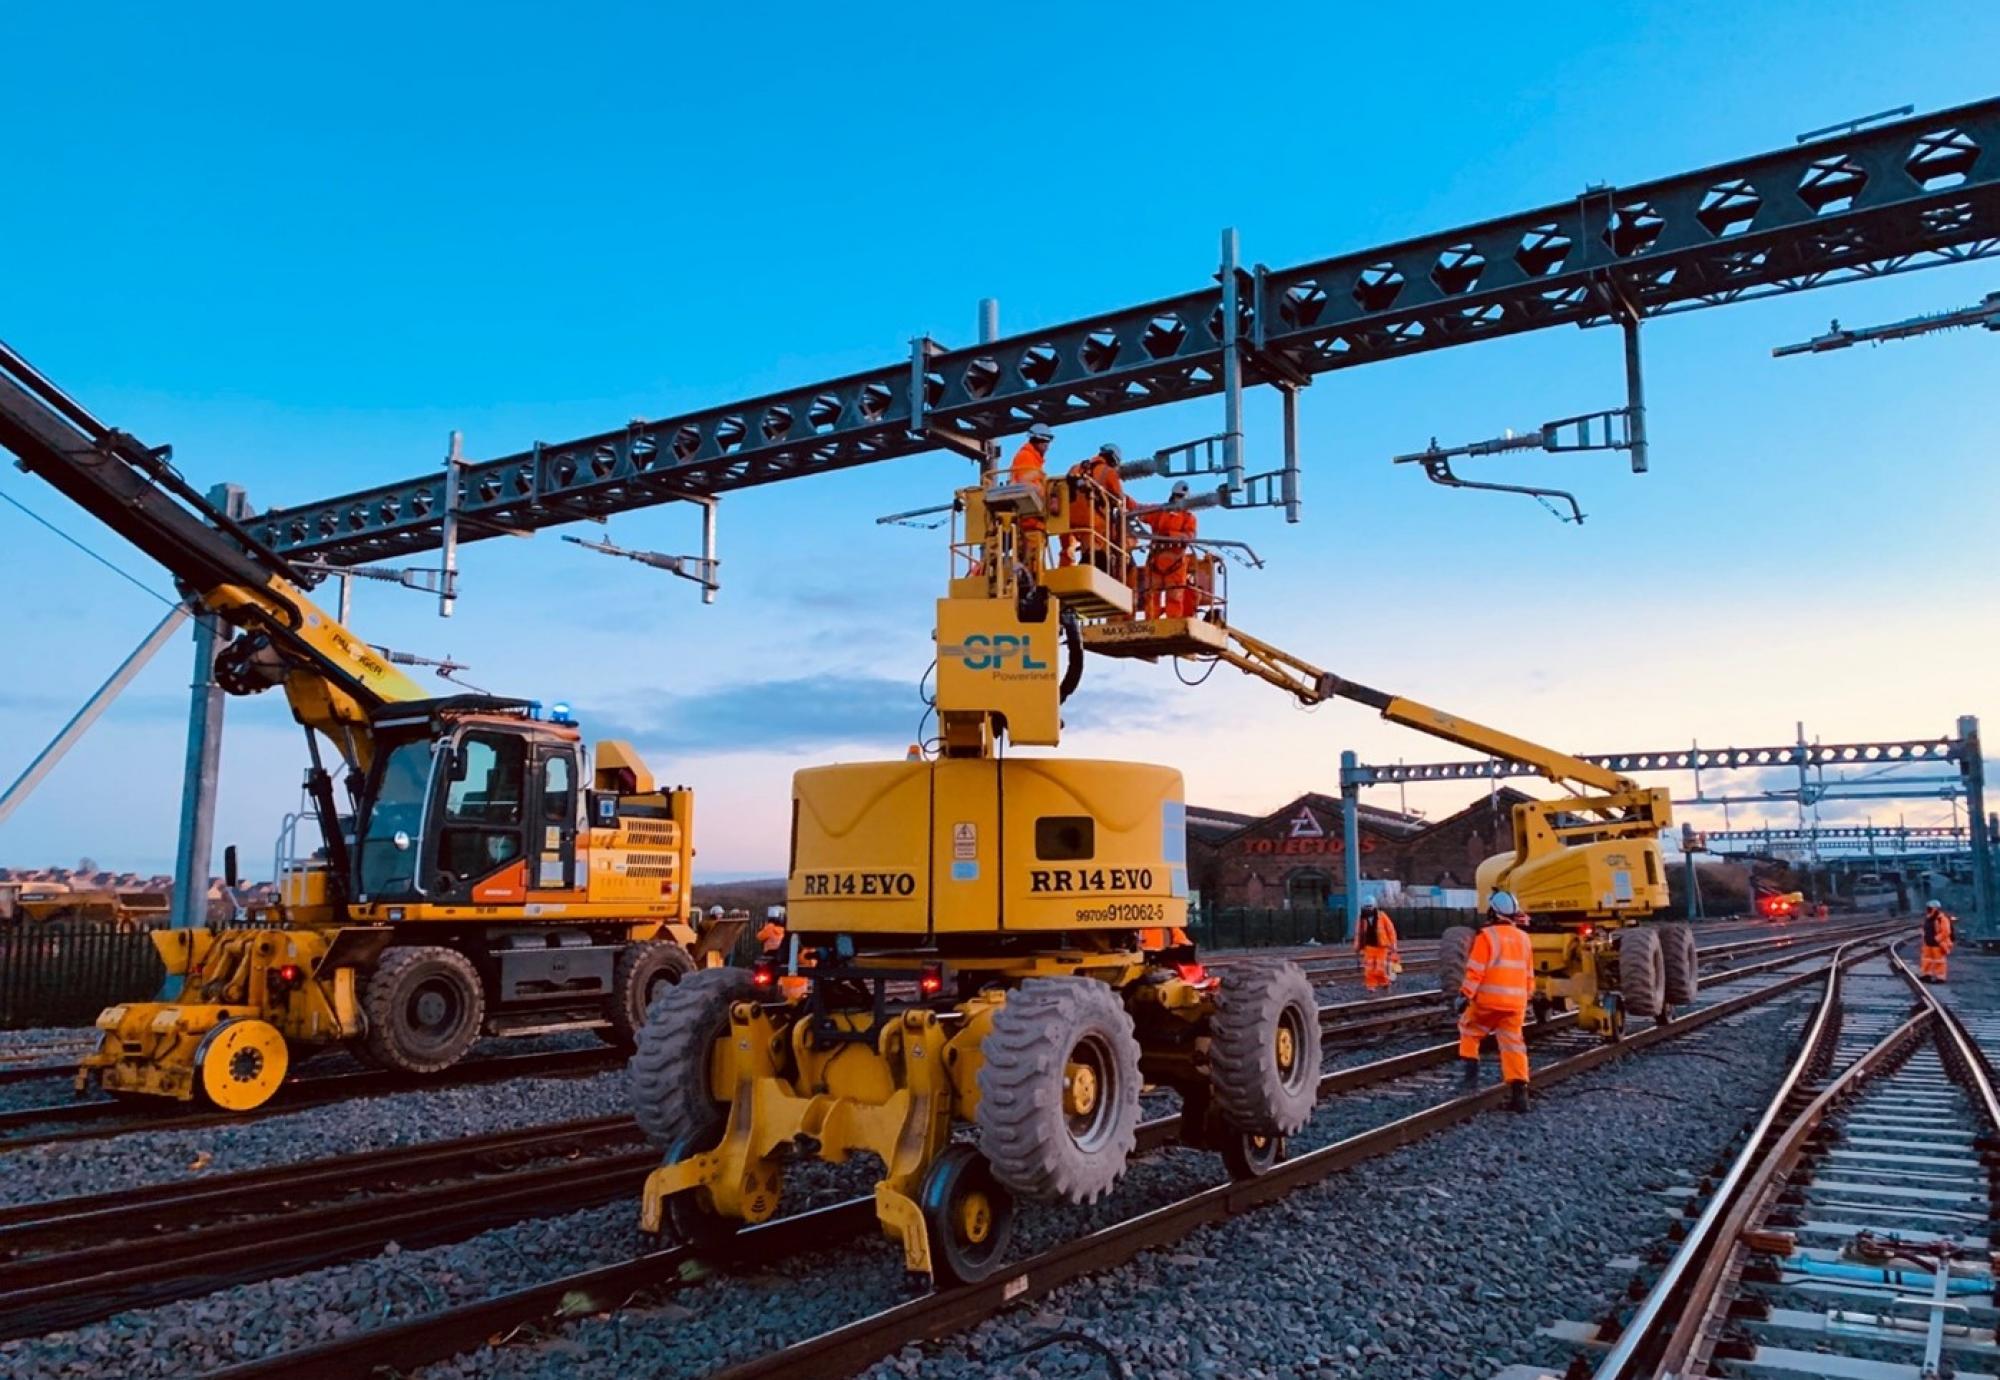 Previous overhead line equipment being installed along the line, via Network rail 